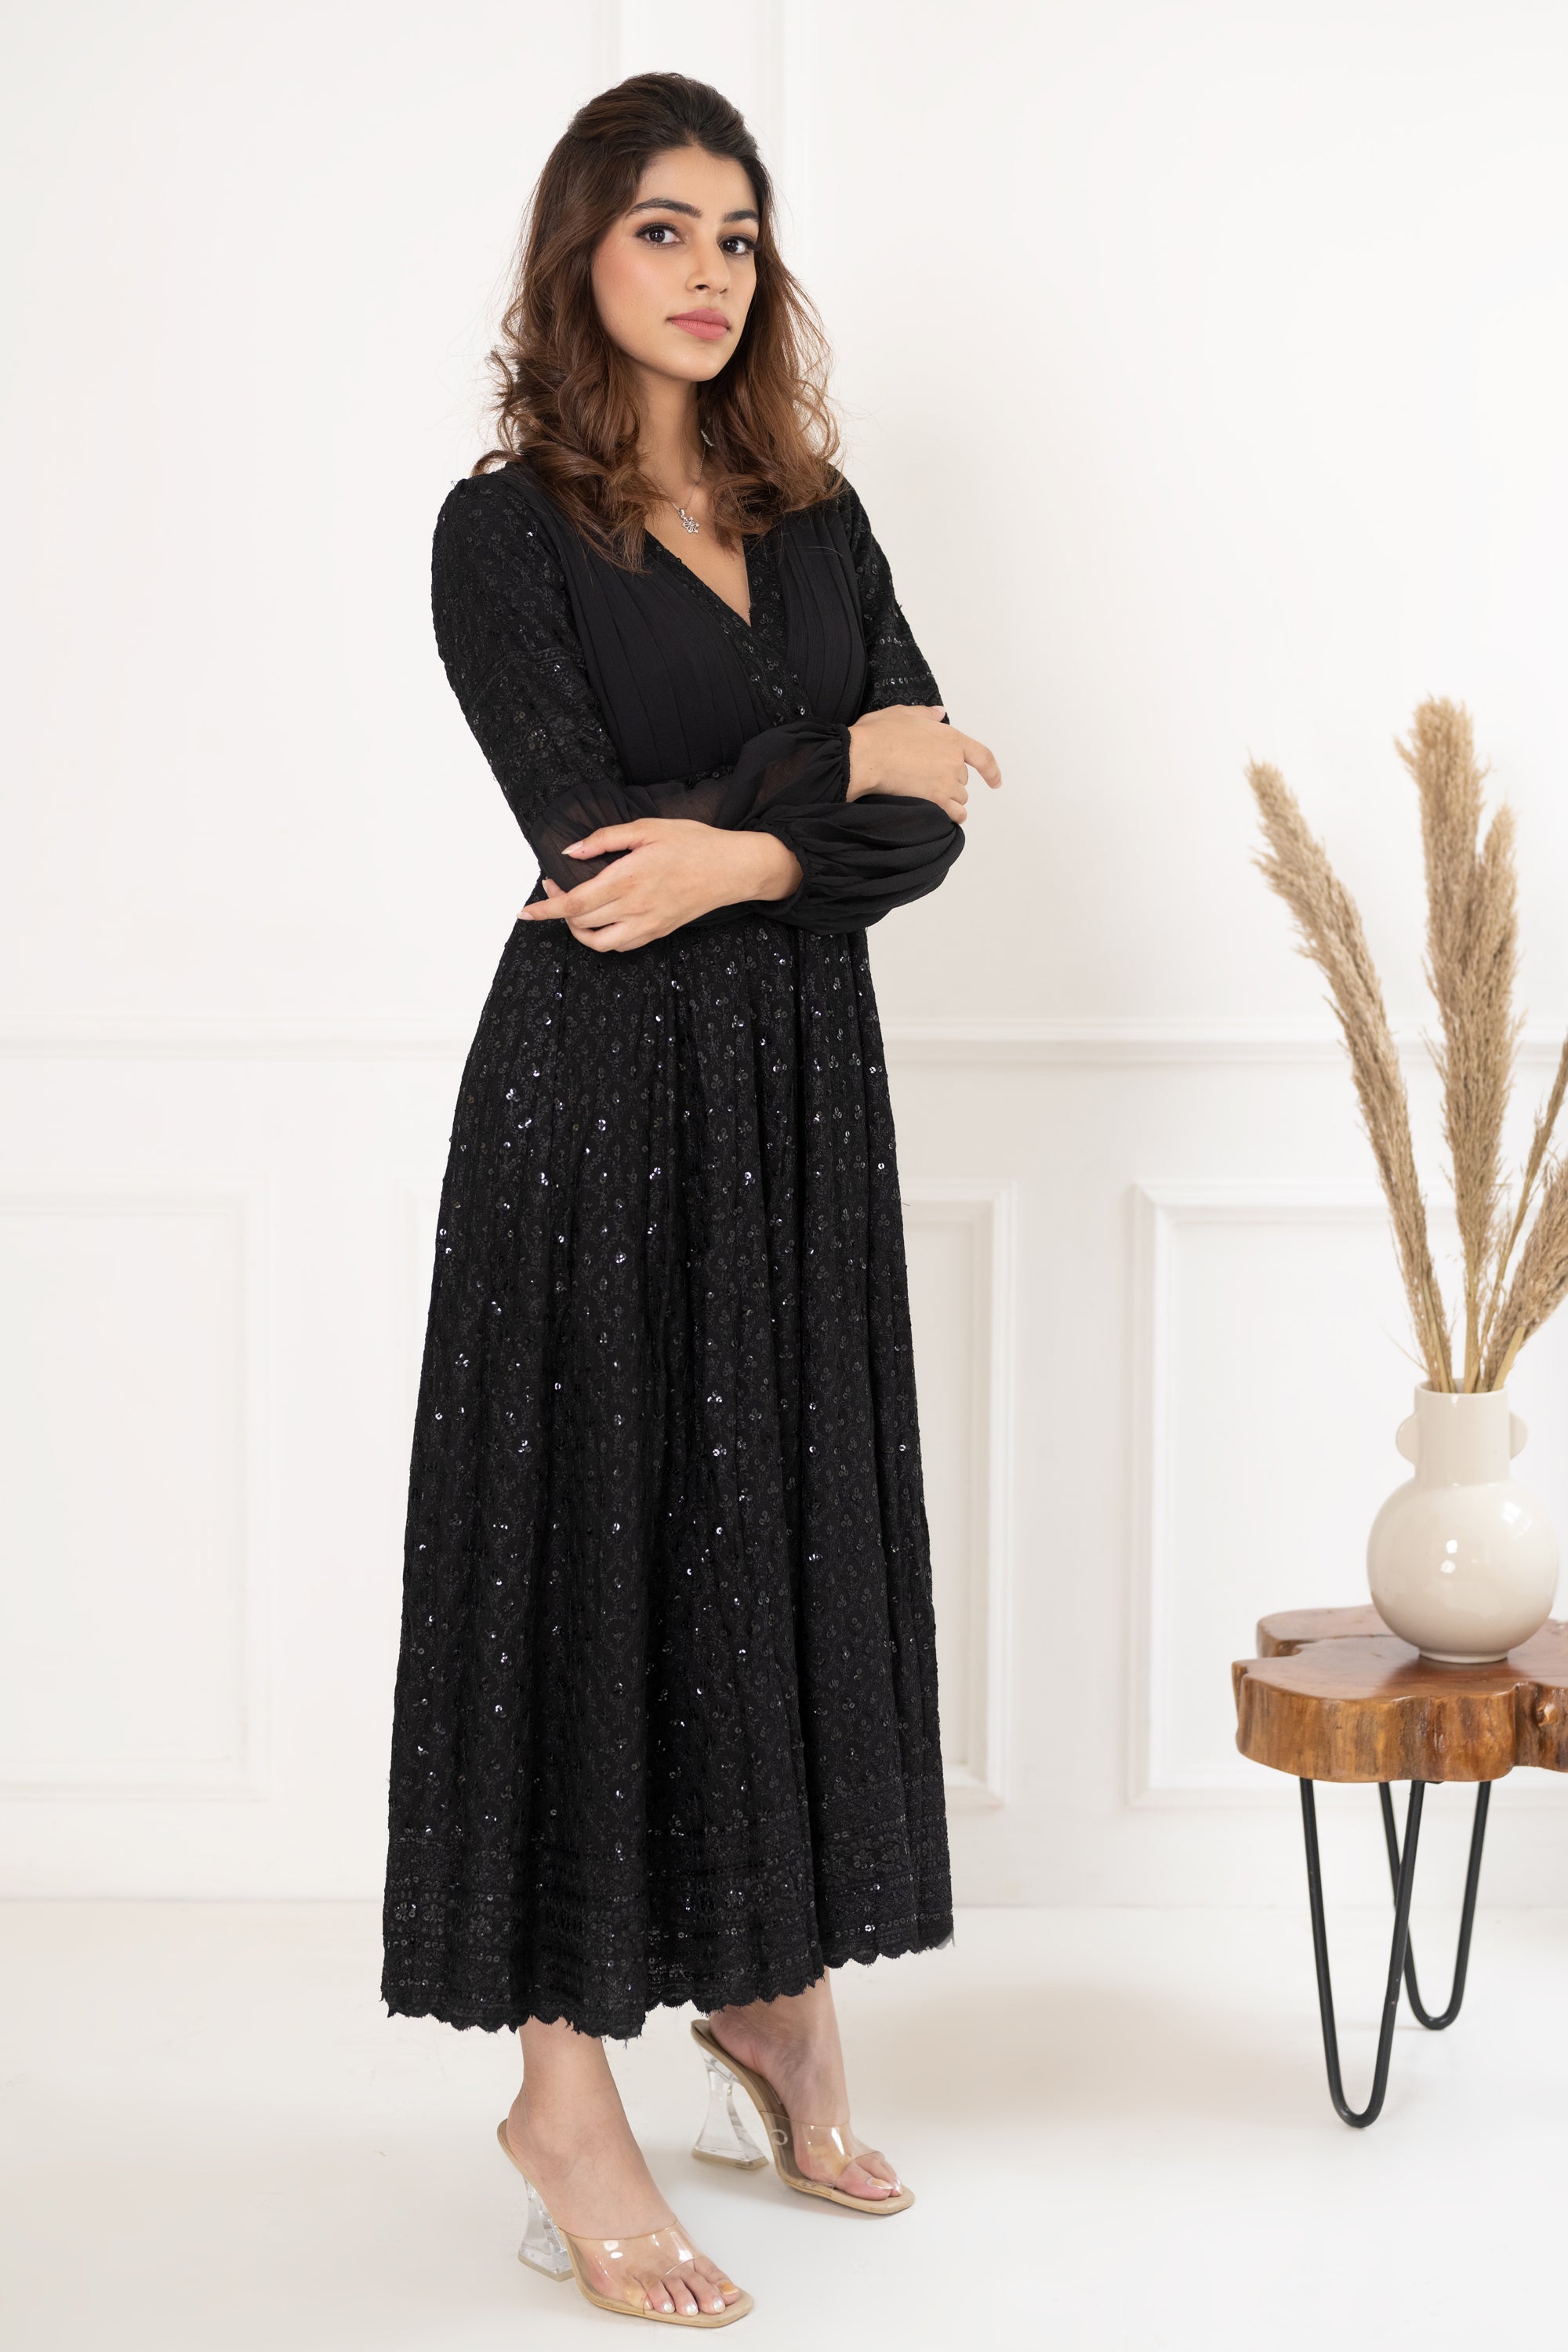 Women's Black Embroidered Dress - Saras The Label